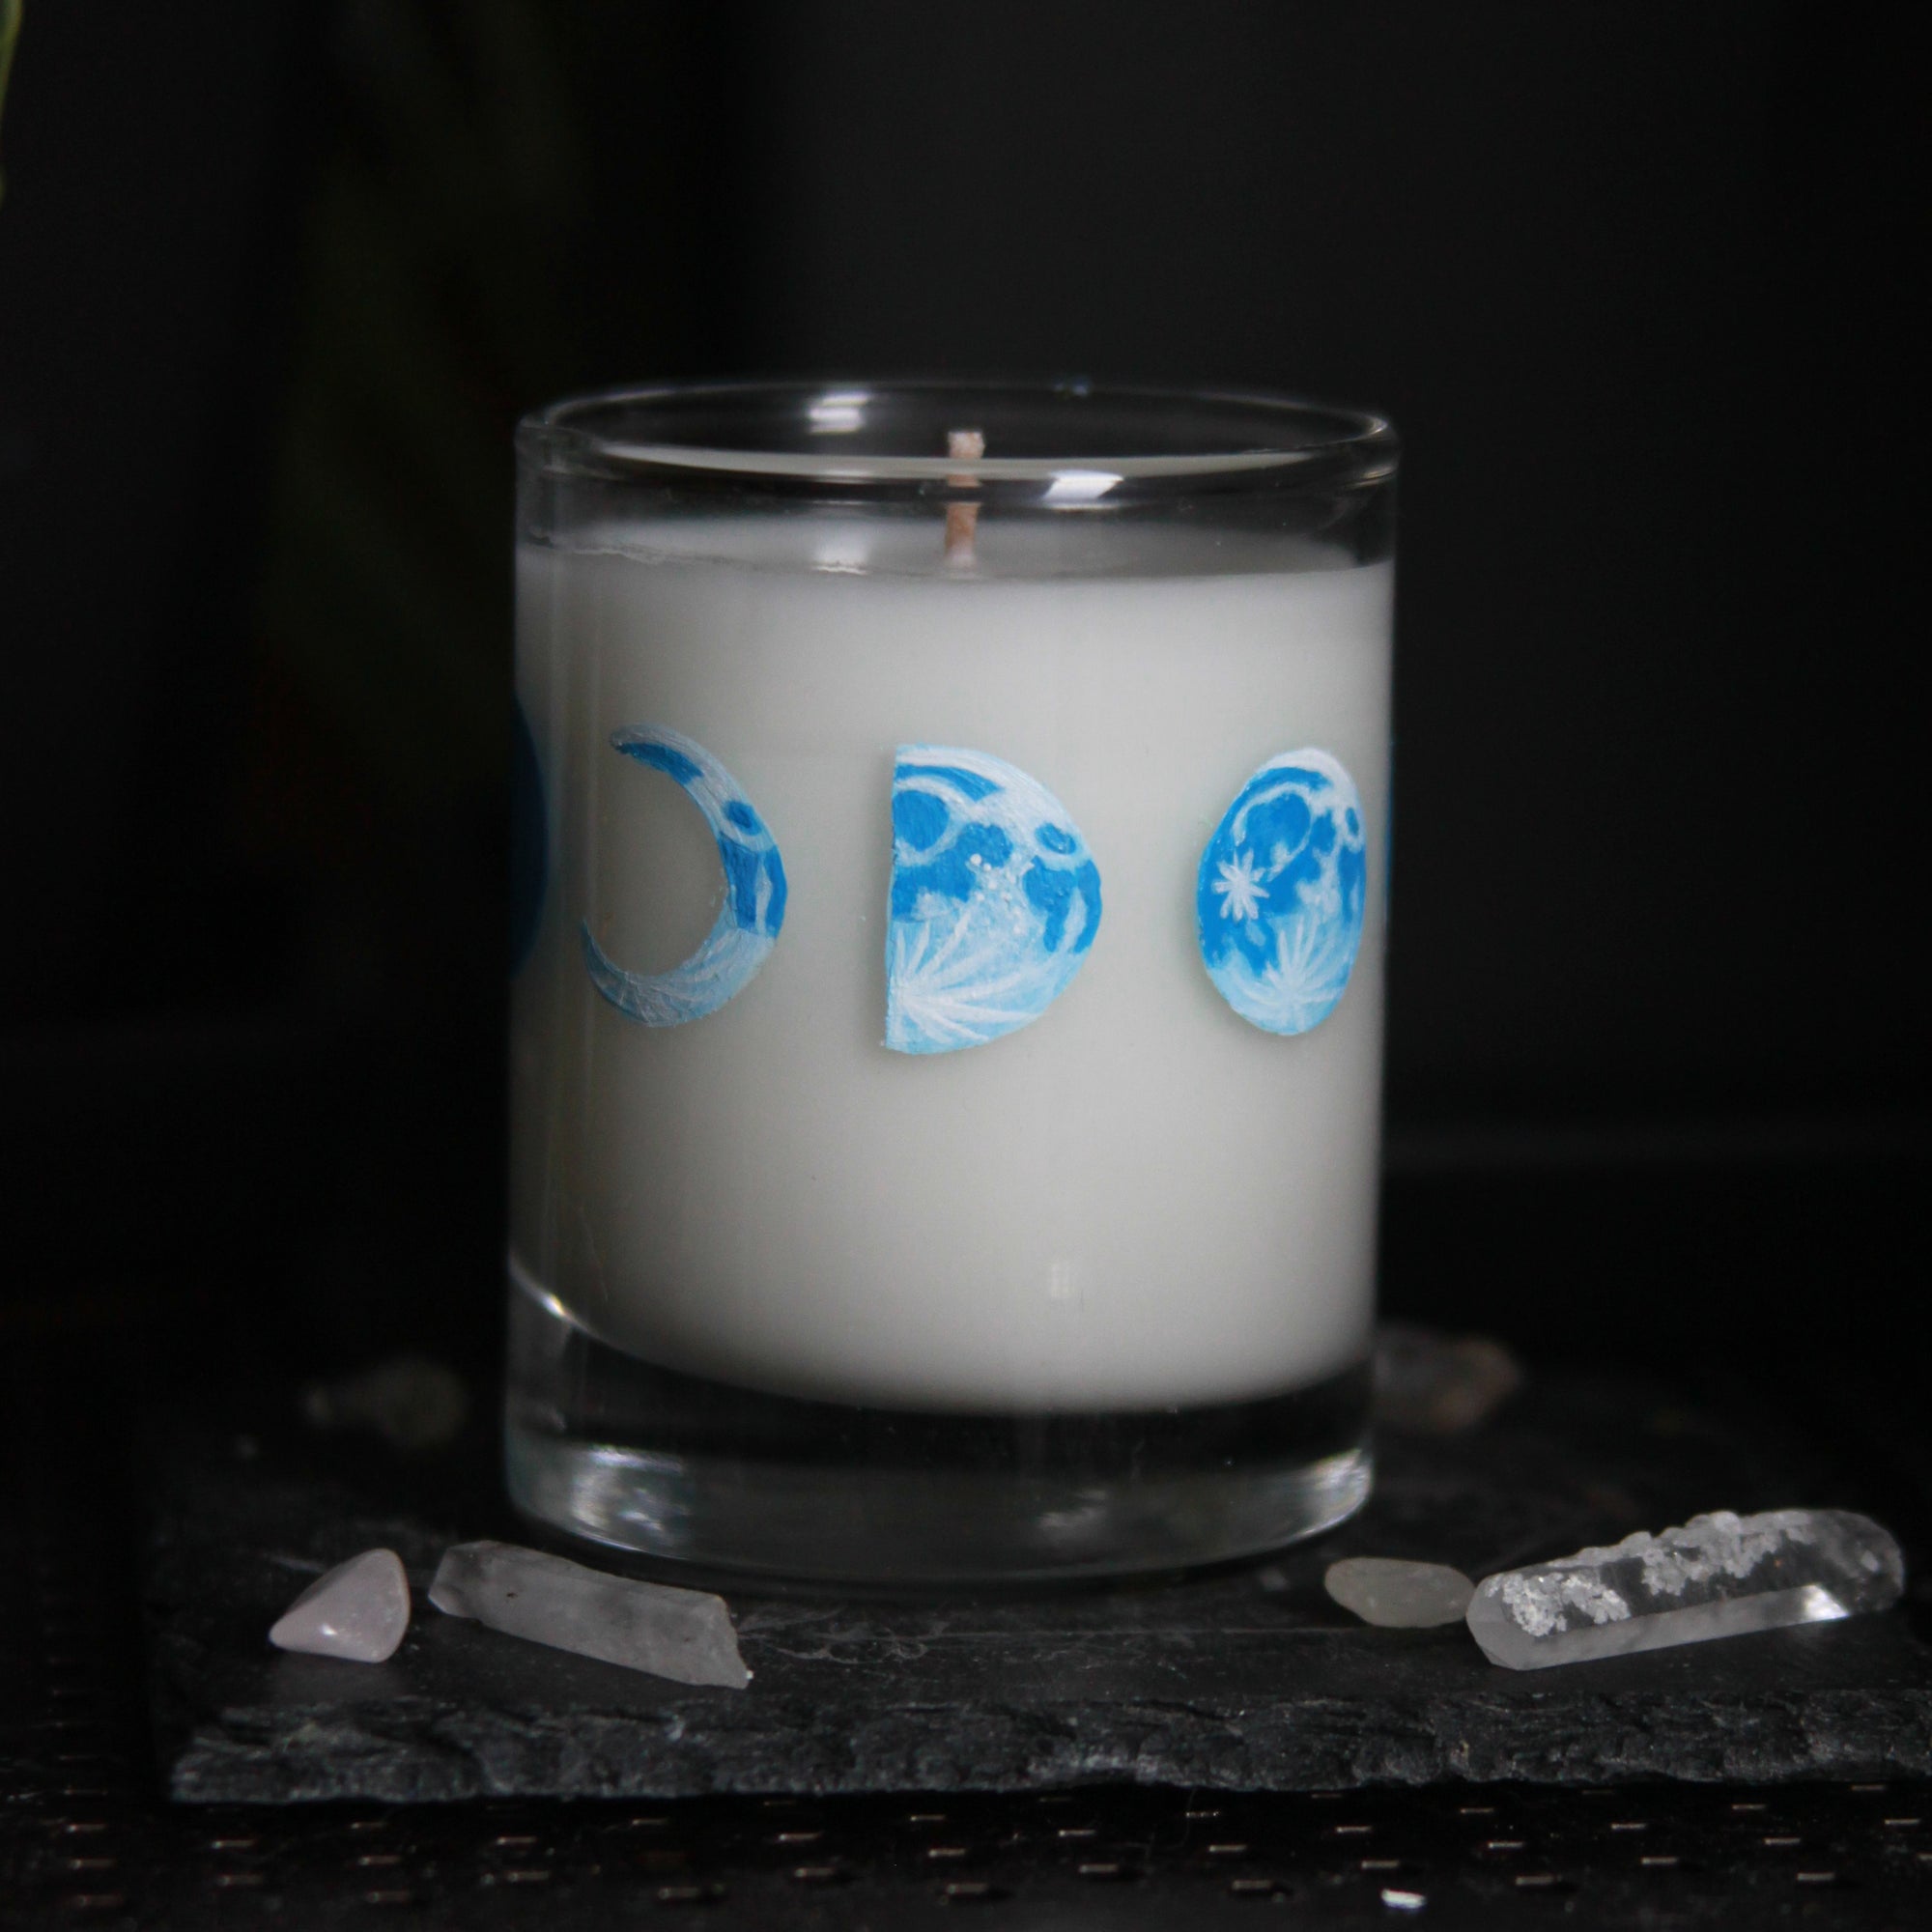 A candle votive poured with white coconut-apricot wax features 8 hand-painted phases of the moon in shades of blue. The design wraps around the glass.